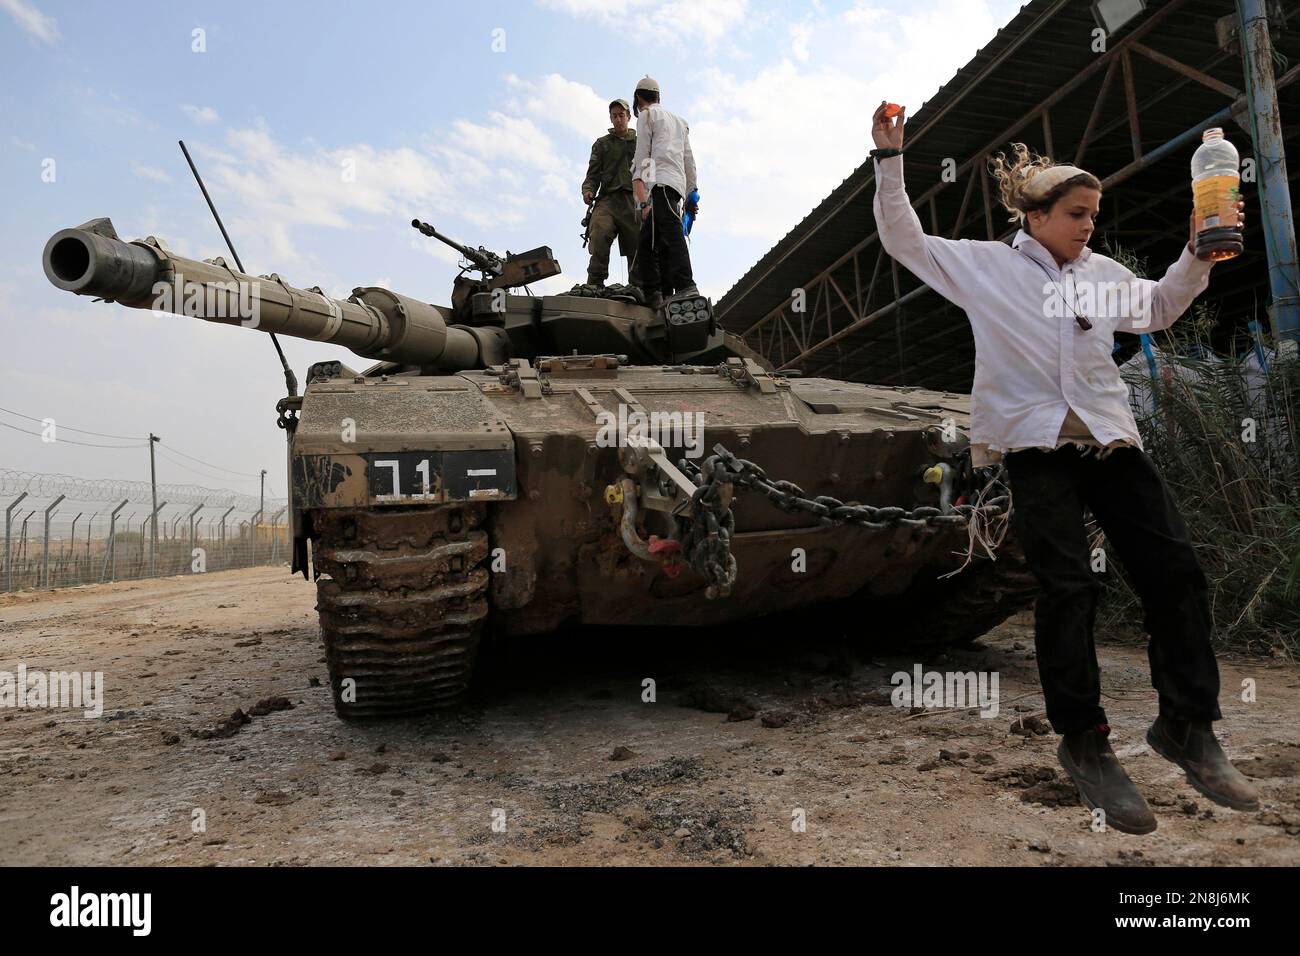 An ultra-Orthodox Jew of the Bratslav Hasidic sect, part of a team that gathered to show support for Israeli forces, jumps from a tank in southern Israel, close to the Israel Gaza Strip Border, Thursday, Nov. 22, 2012. A cease-fire agreement between Israel and the Gaza Strip's Hamas rulers took effect Wednesday night, bringing an end to eight days of the fiercest fighting in years and possibly signaling a new era of relations between the bitter enemies. (AP Photo/Tsafrir Abayov) Stock Photo